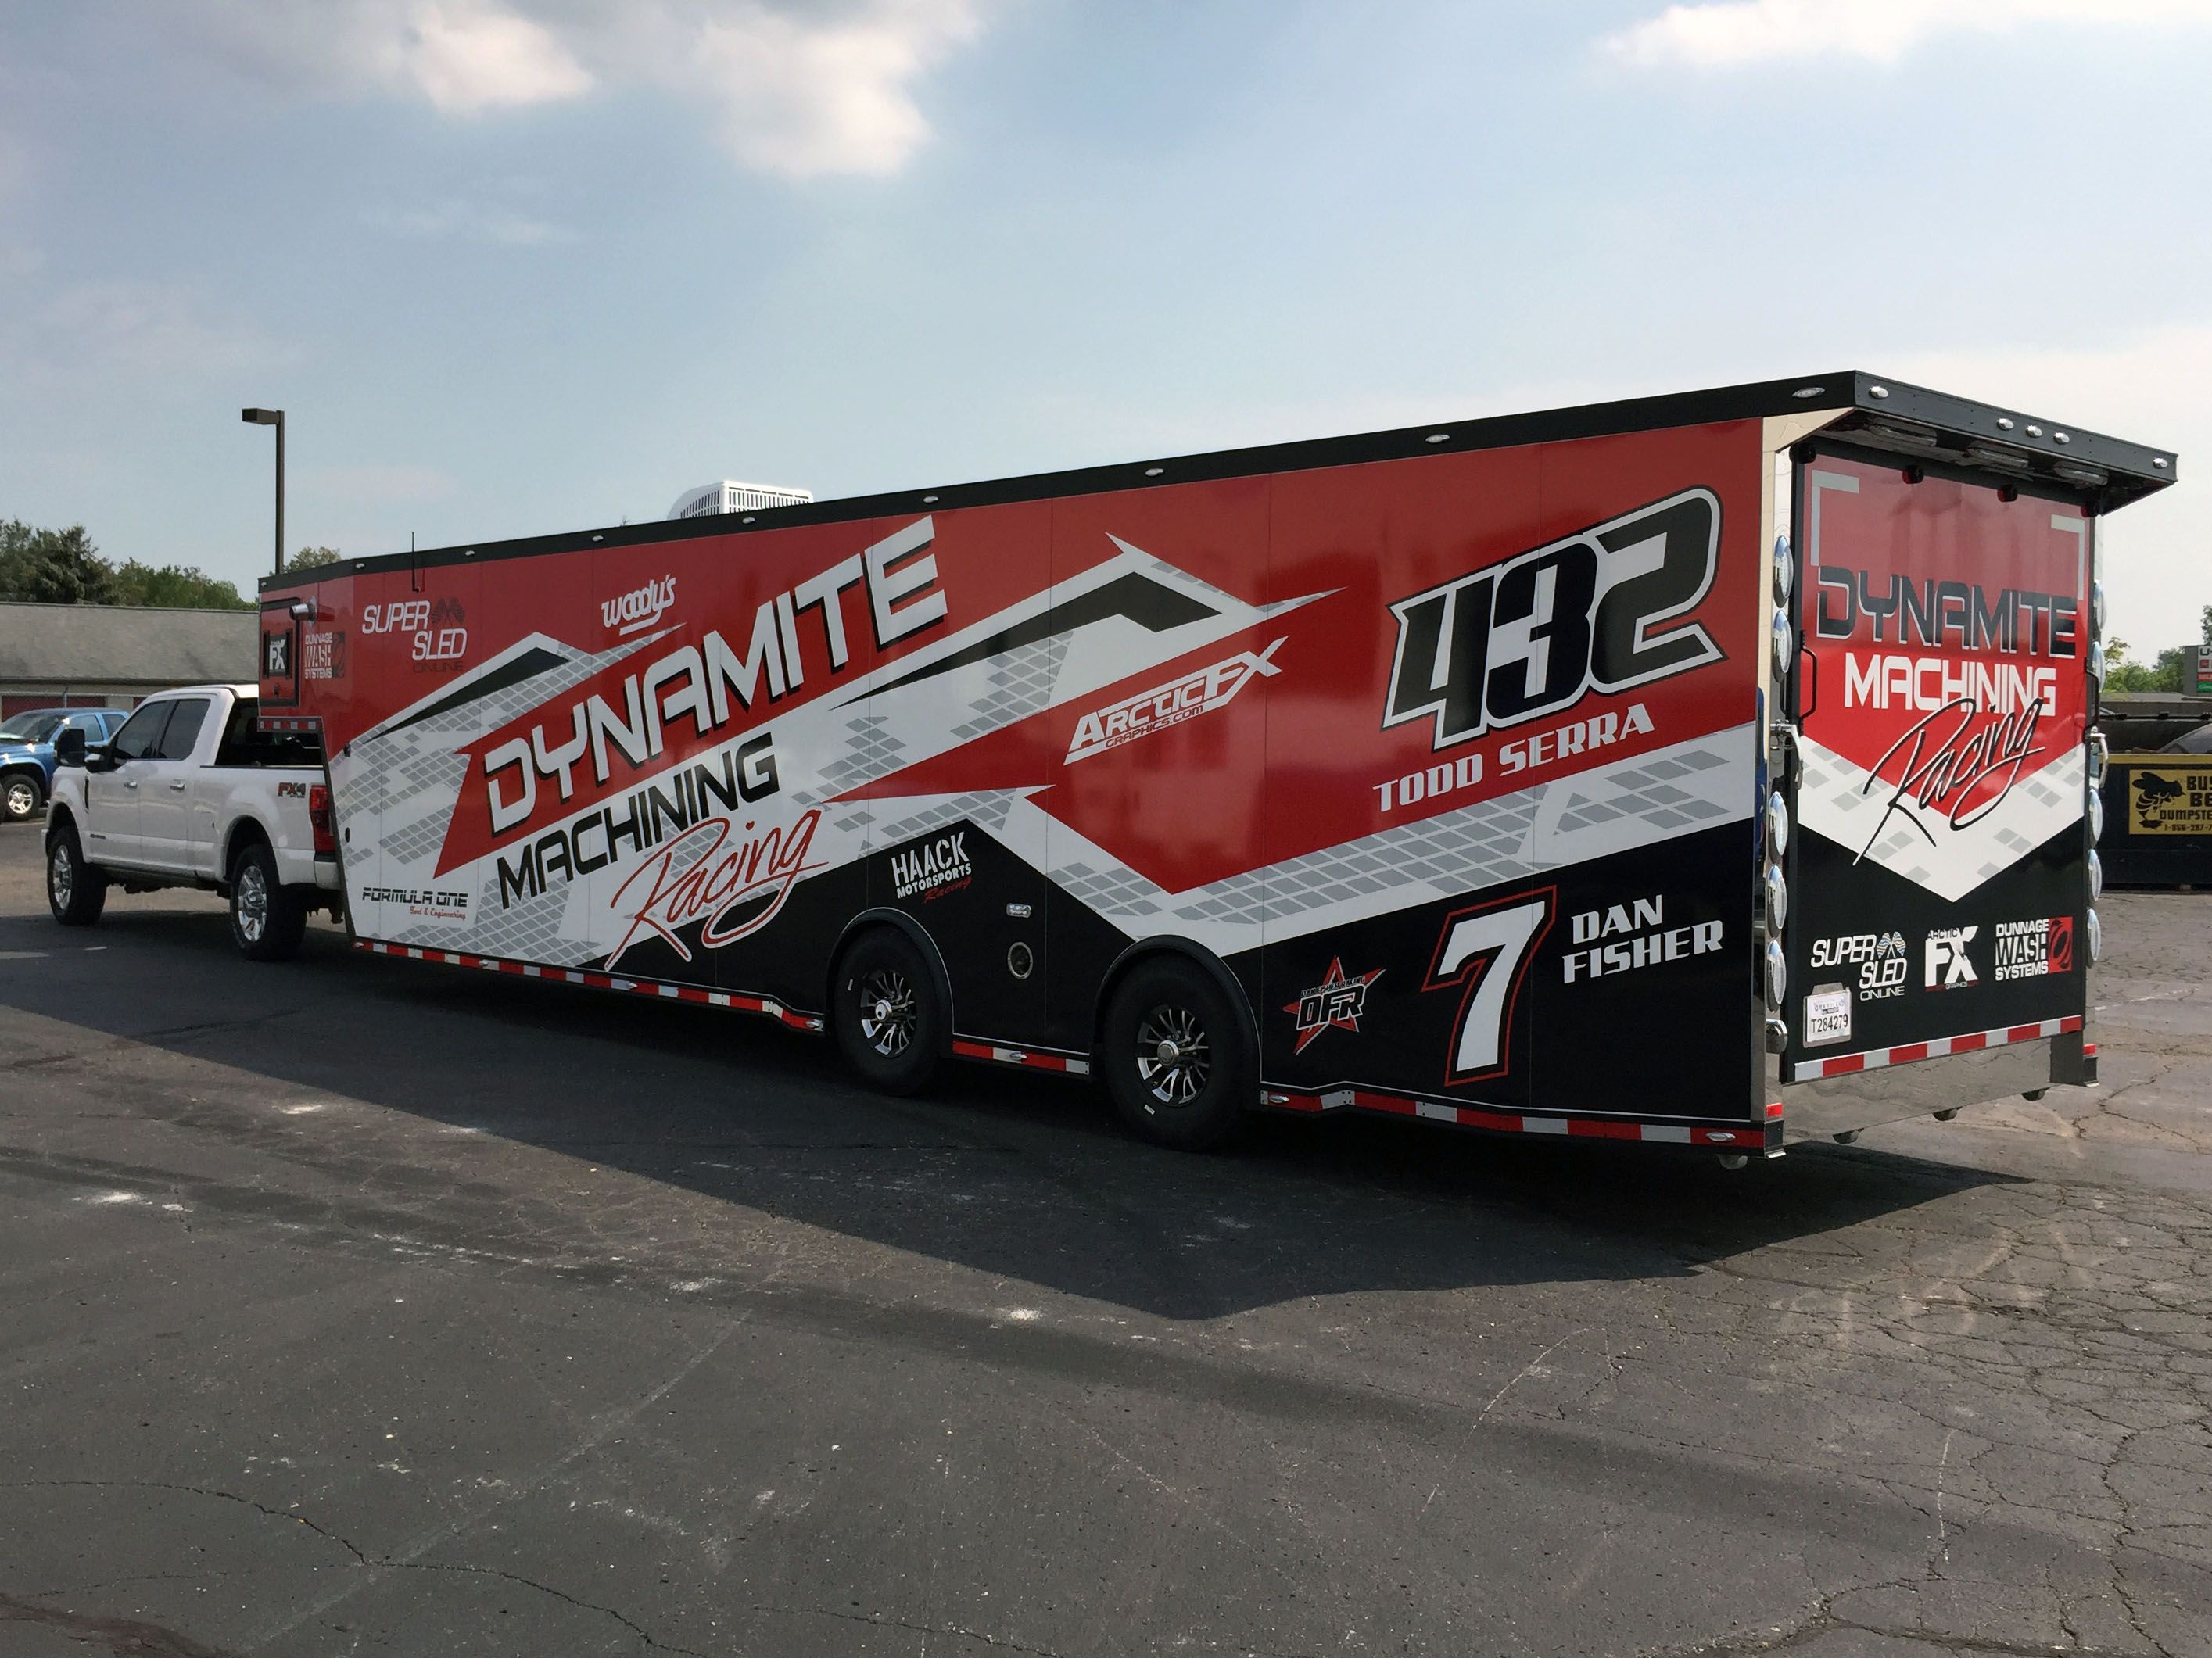 A snowmobile trailer with a custom vinyl wrap with black, red, and white shapes and patterns.